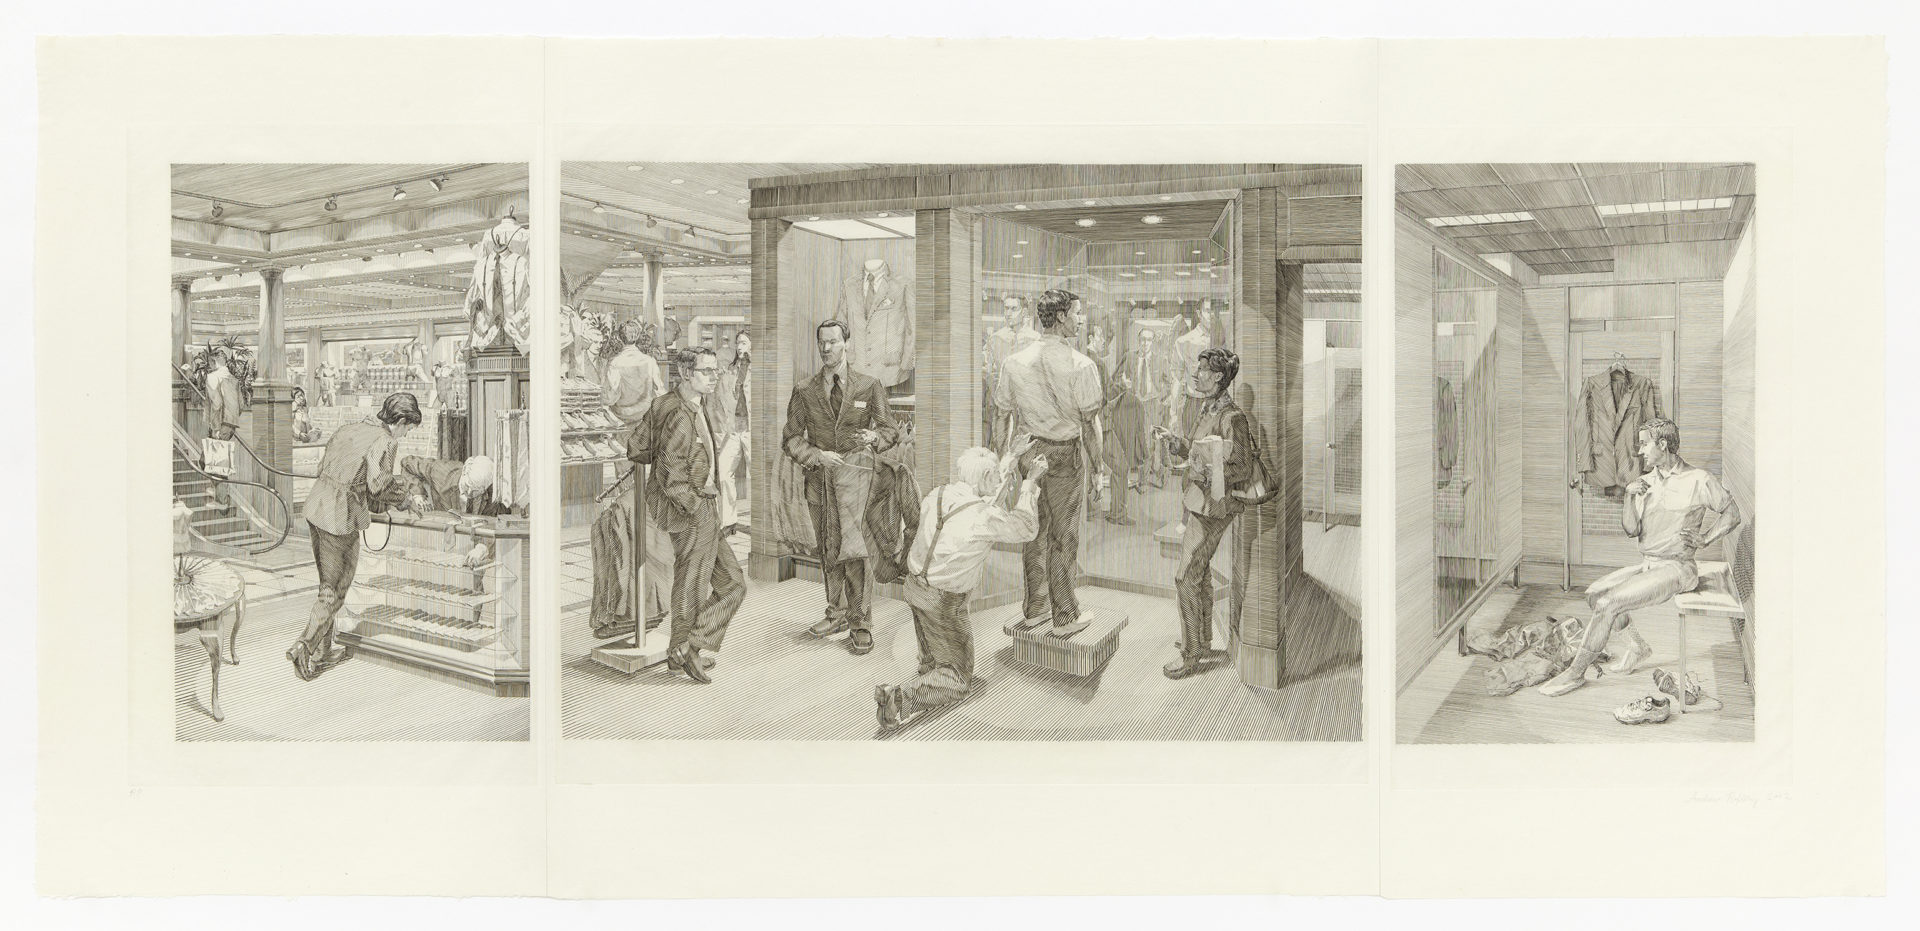 Suit Shopping: An Engraved Narrative, 2002, Copperplate Engraving, 19 x 41 inches (48.3 x 104.1 cm), Edition of 30